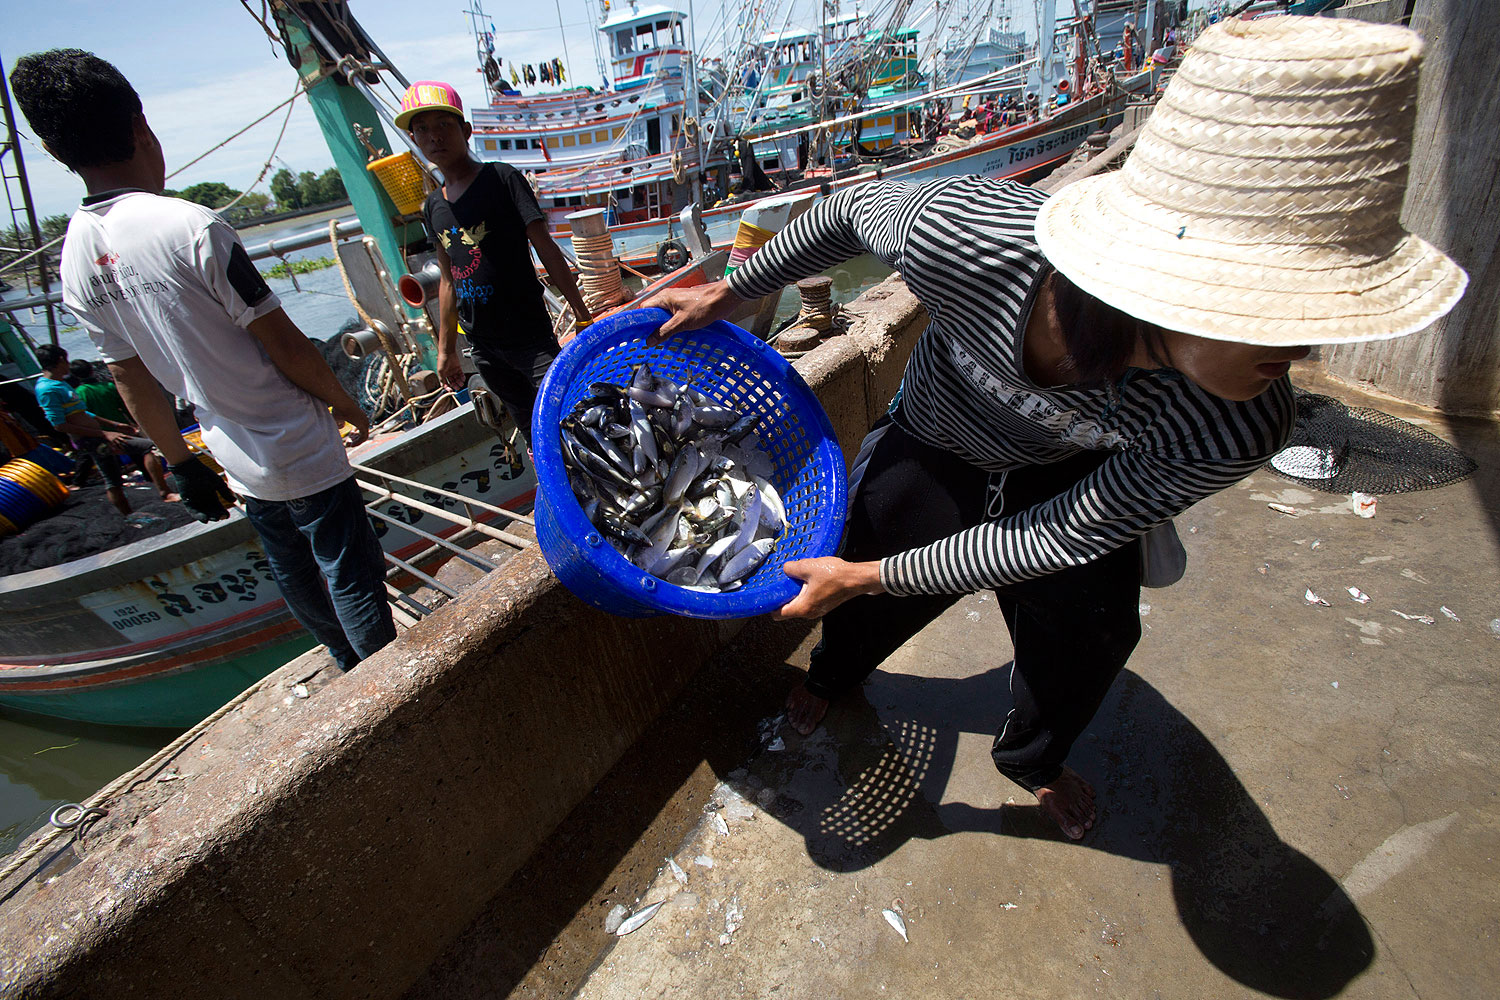 Workers from Burma land fish after a trip to the Gulf of Thailand (Sakchai Lalit / AP)